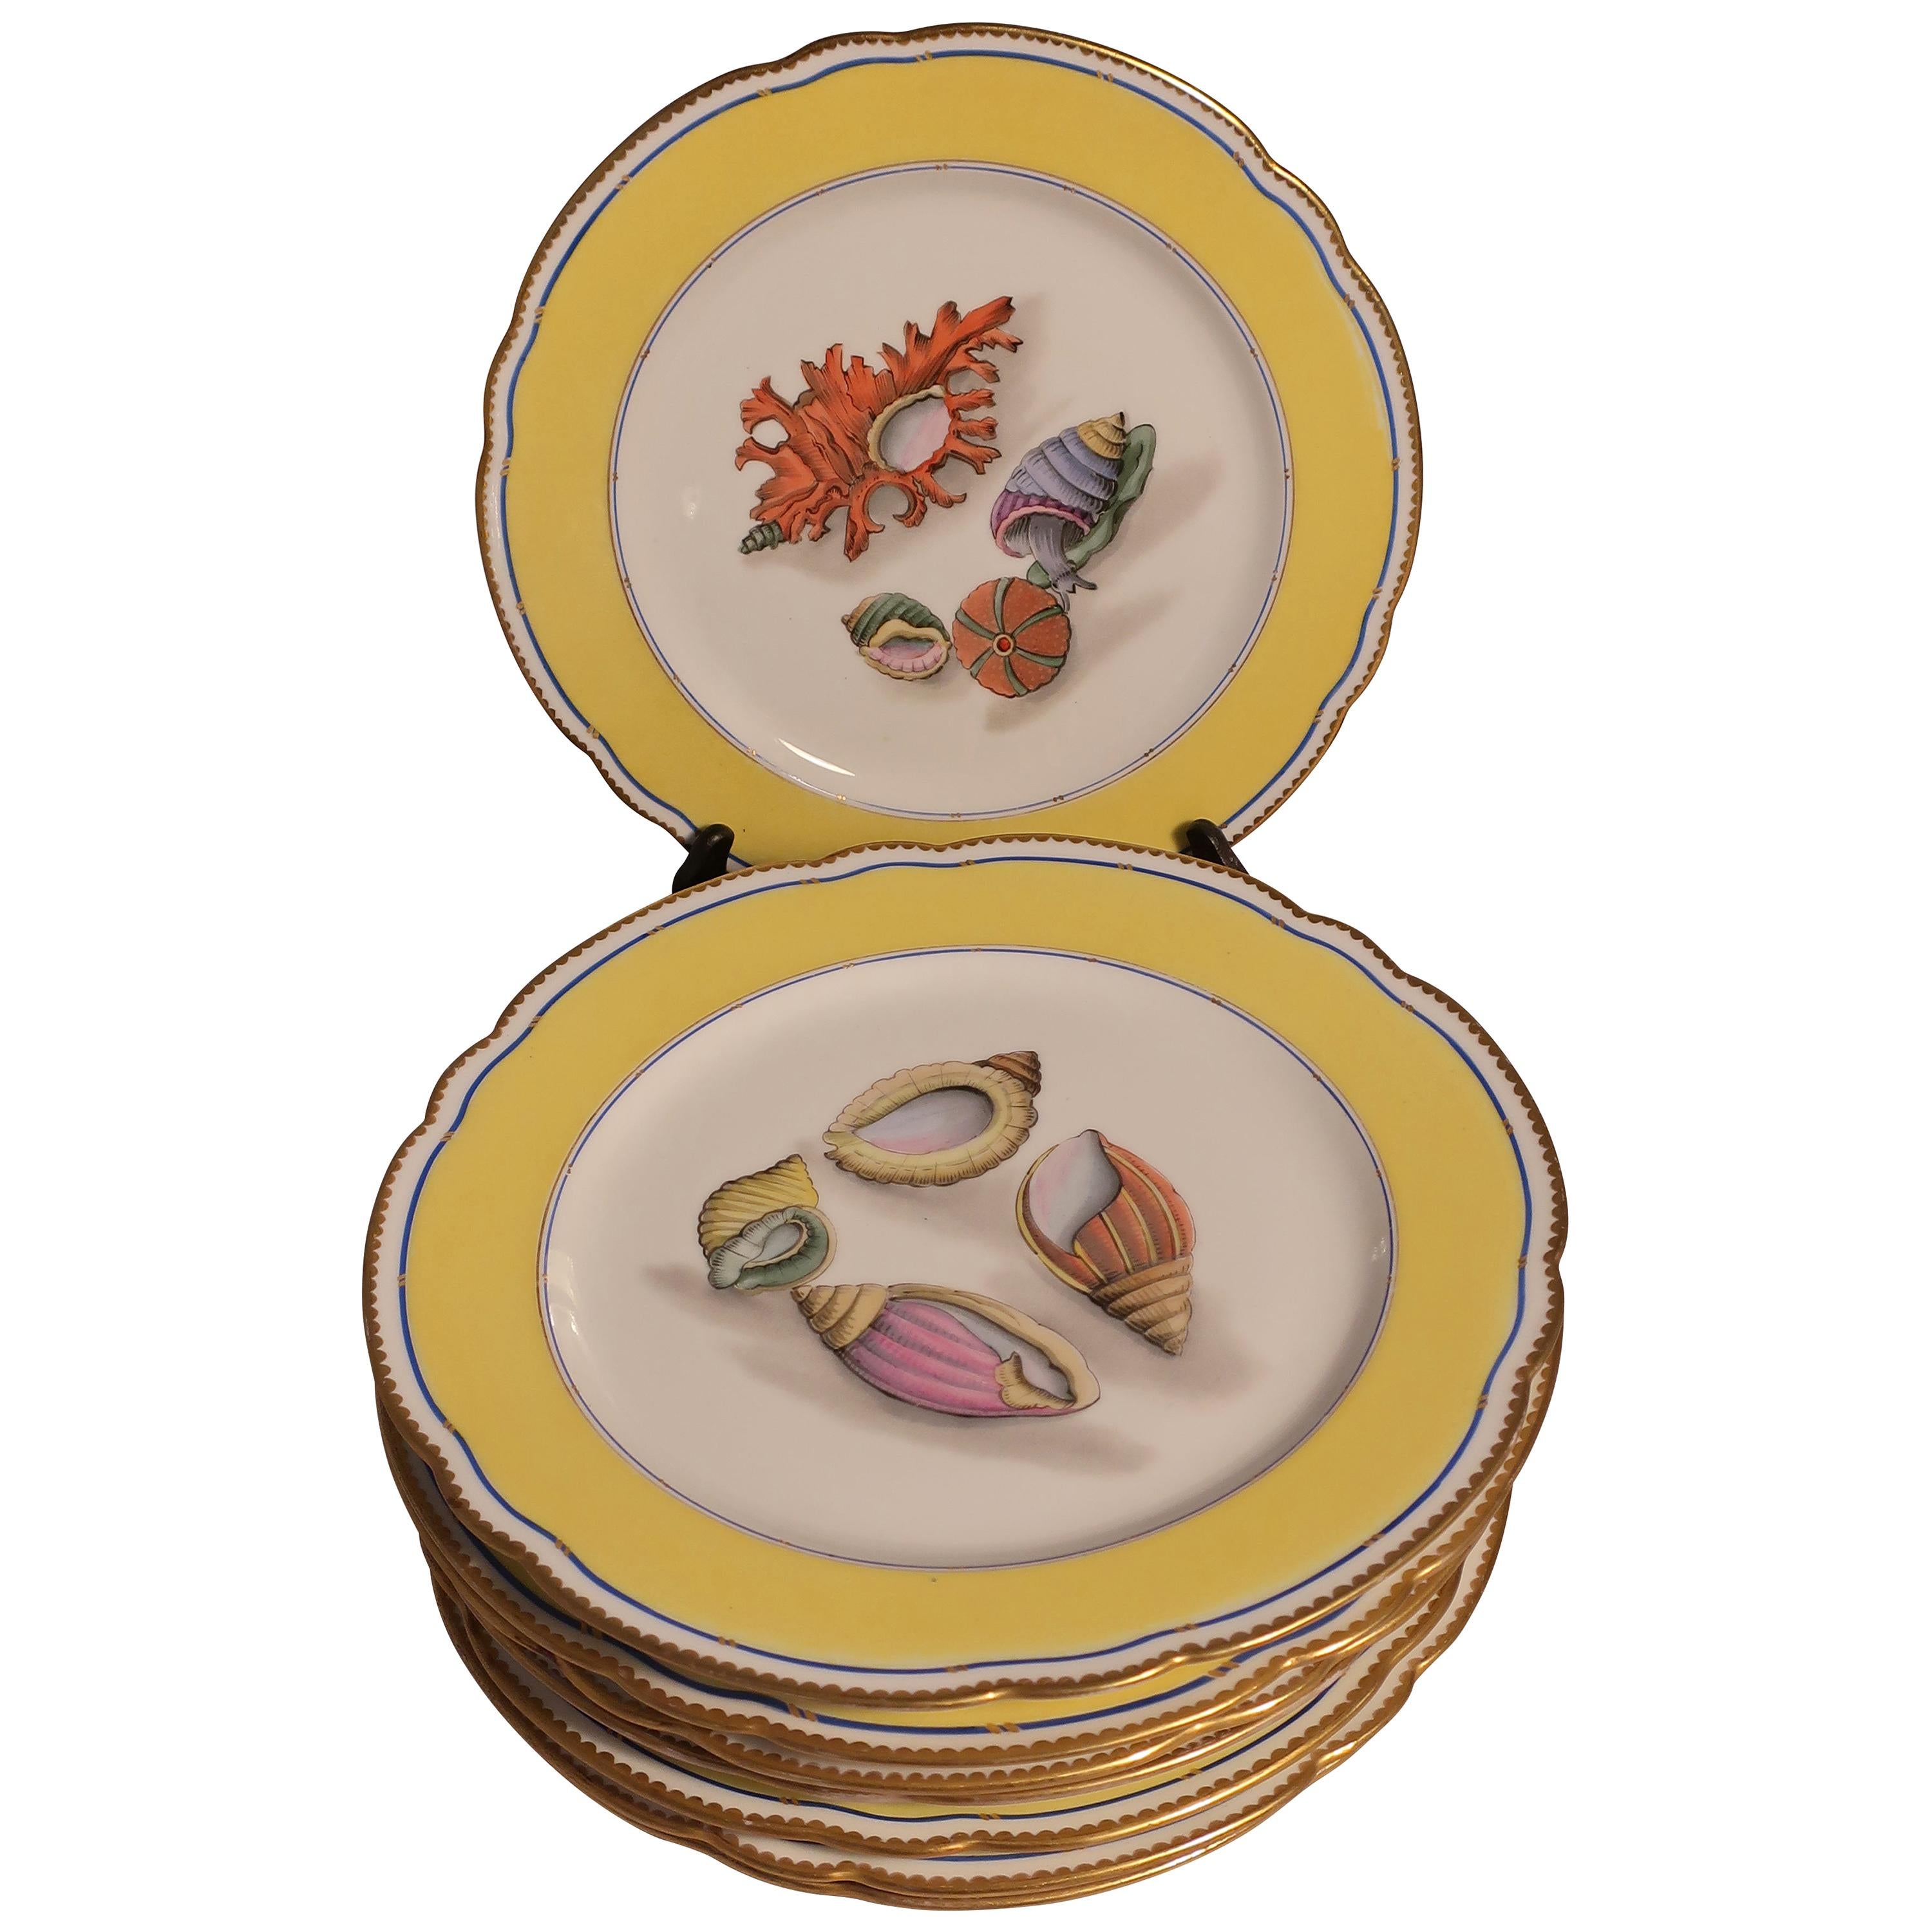 Sea Shell Porcelain Plates French Rousseau, Set of 6 or 12